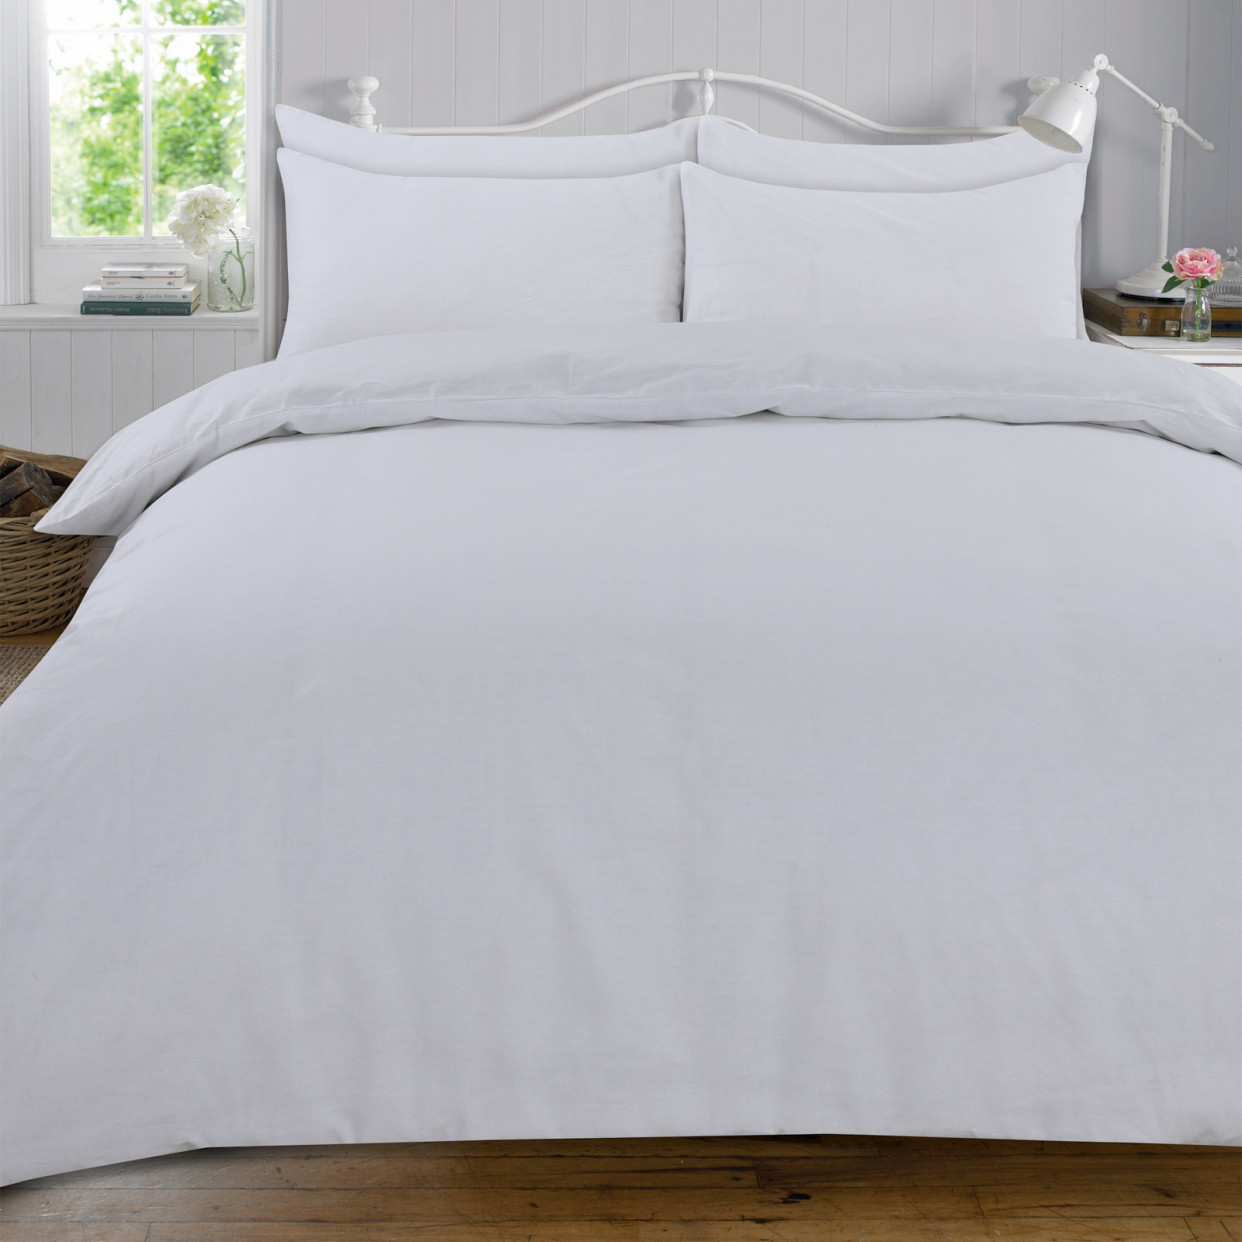 Highams 100% Cotton Bed in a Bag Complete Bedding Set - White>